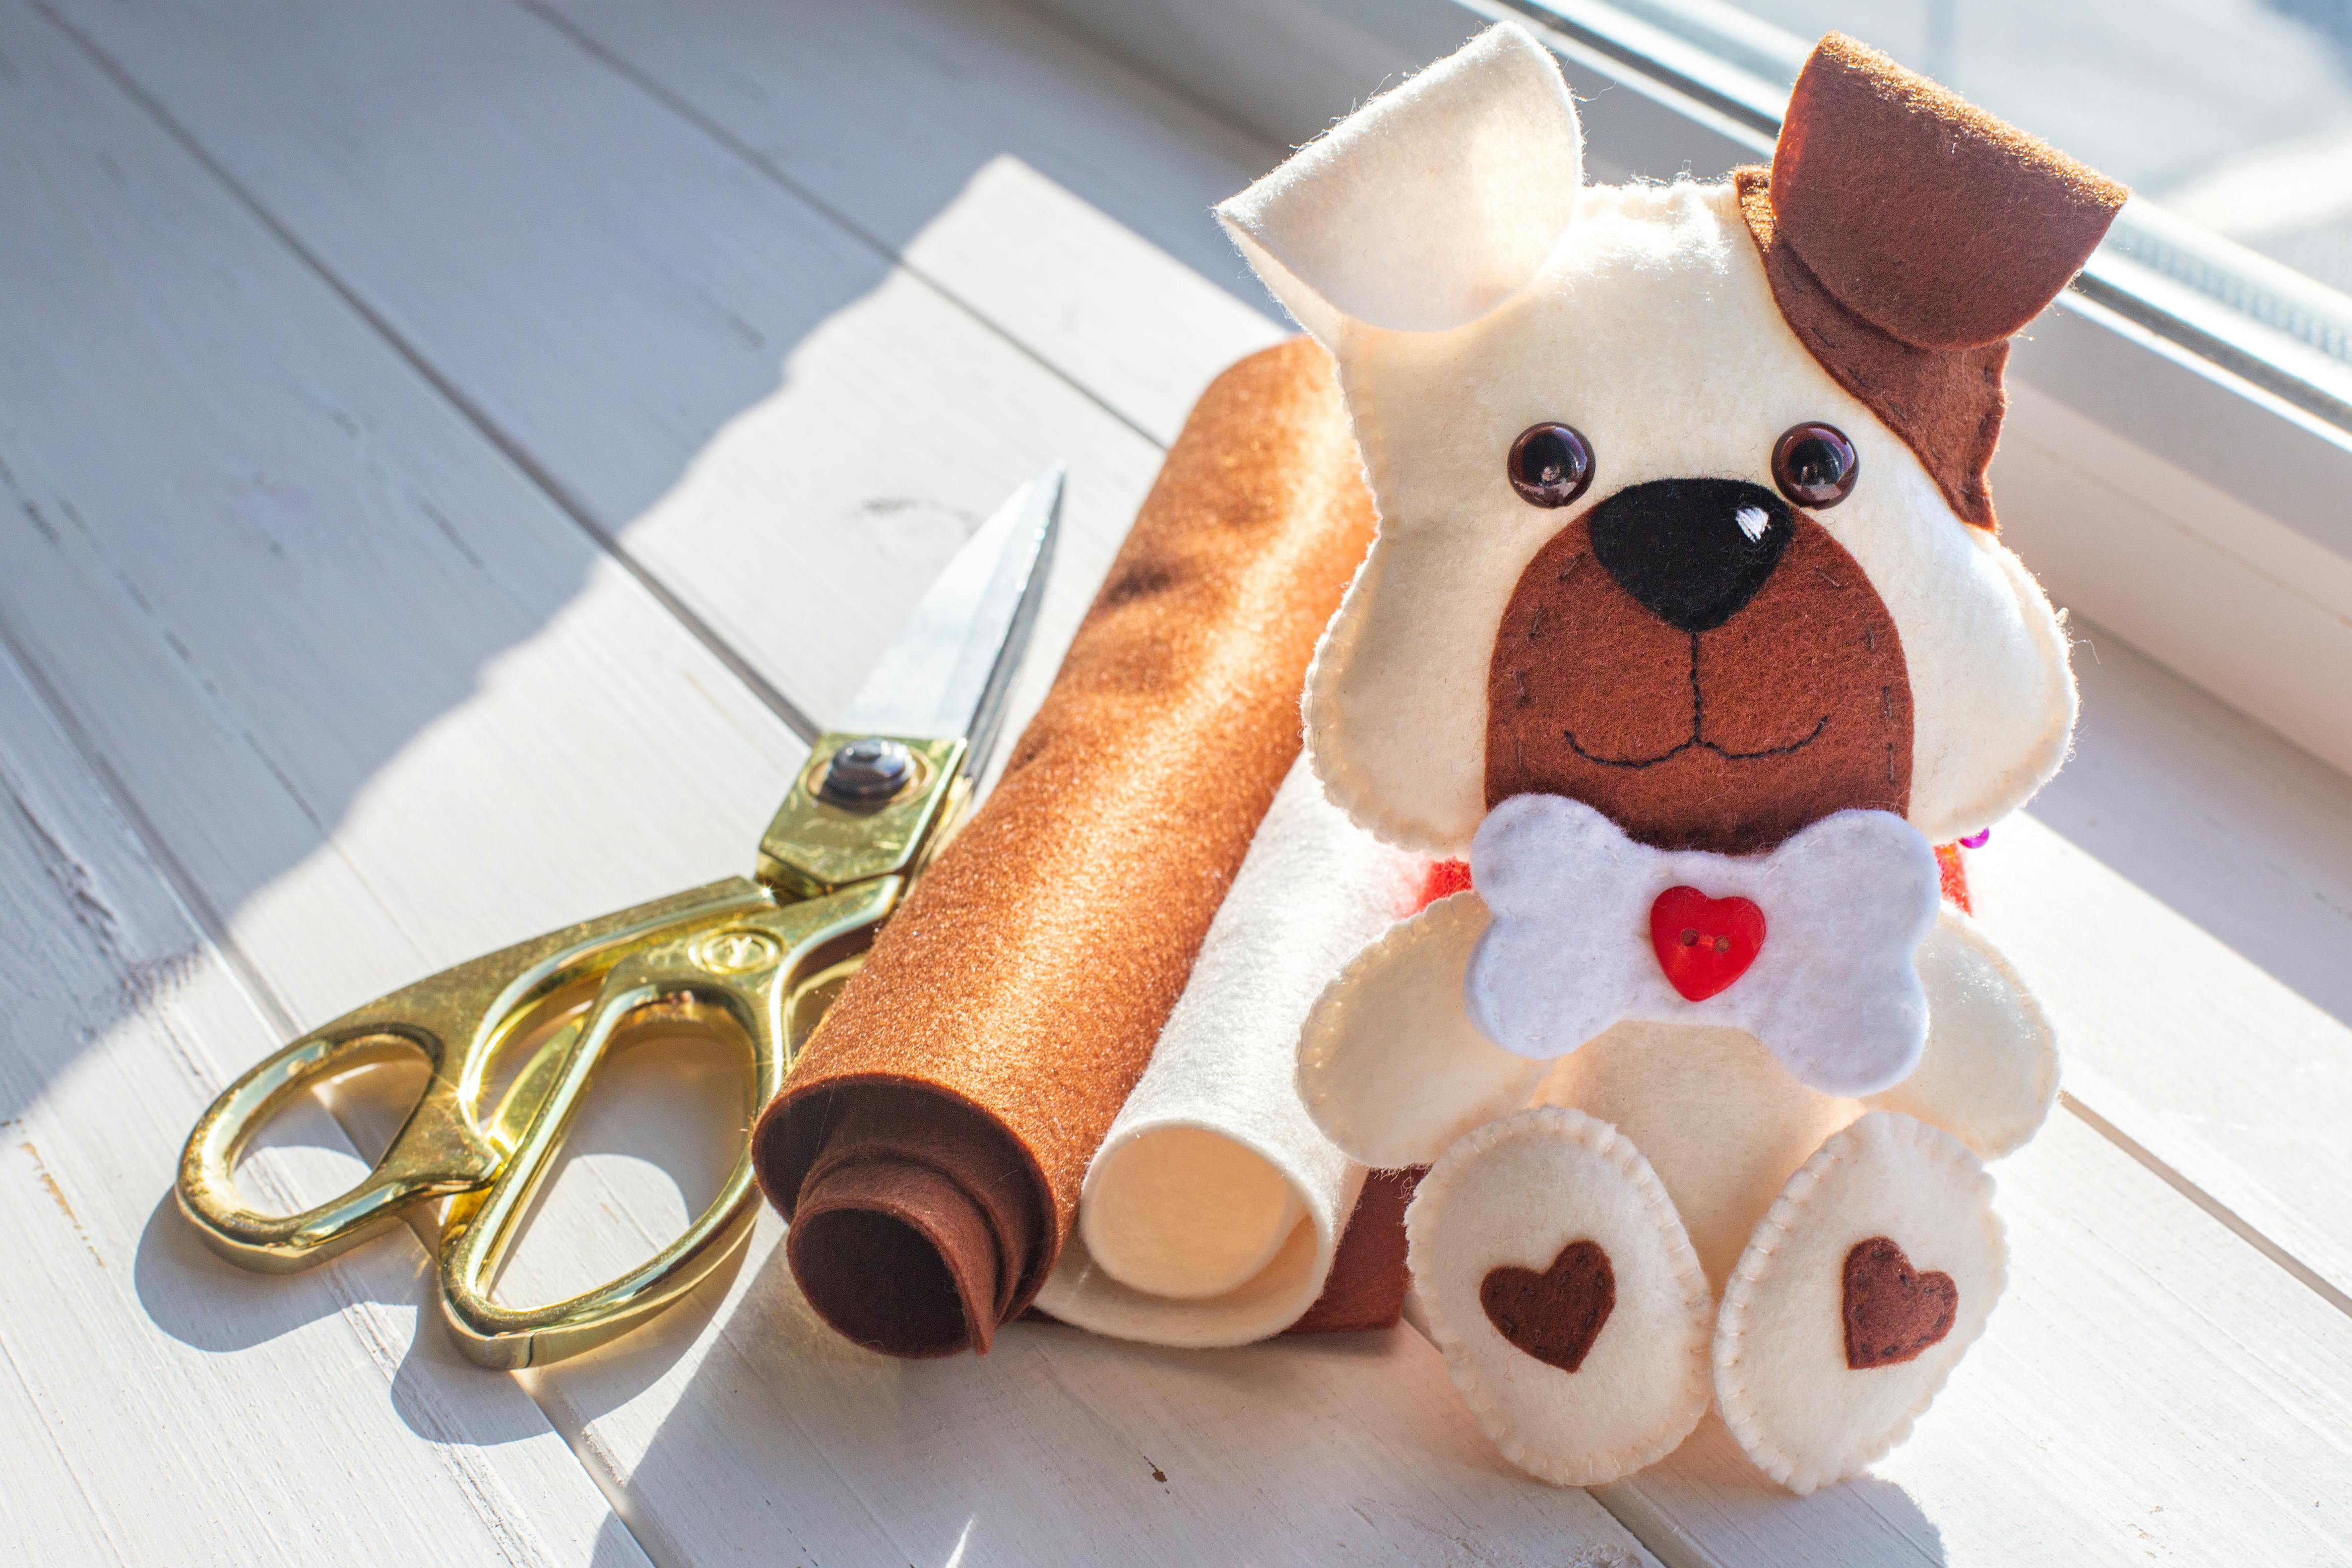  homemade felt dog soft toy with sewing supplies used